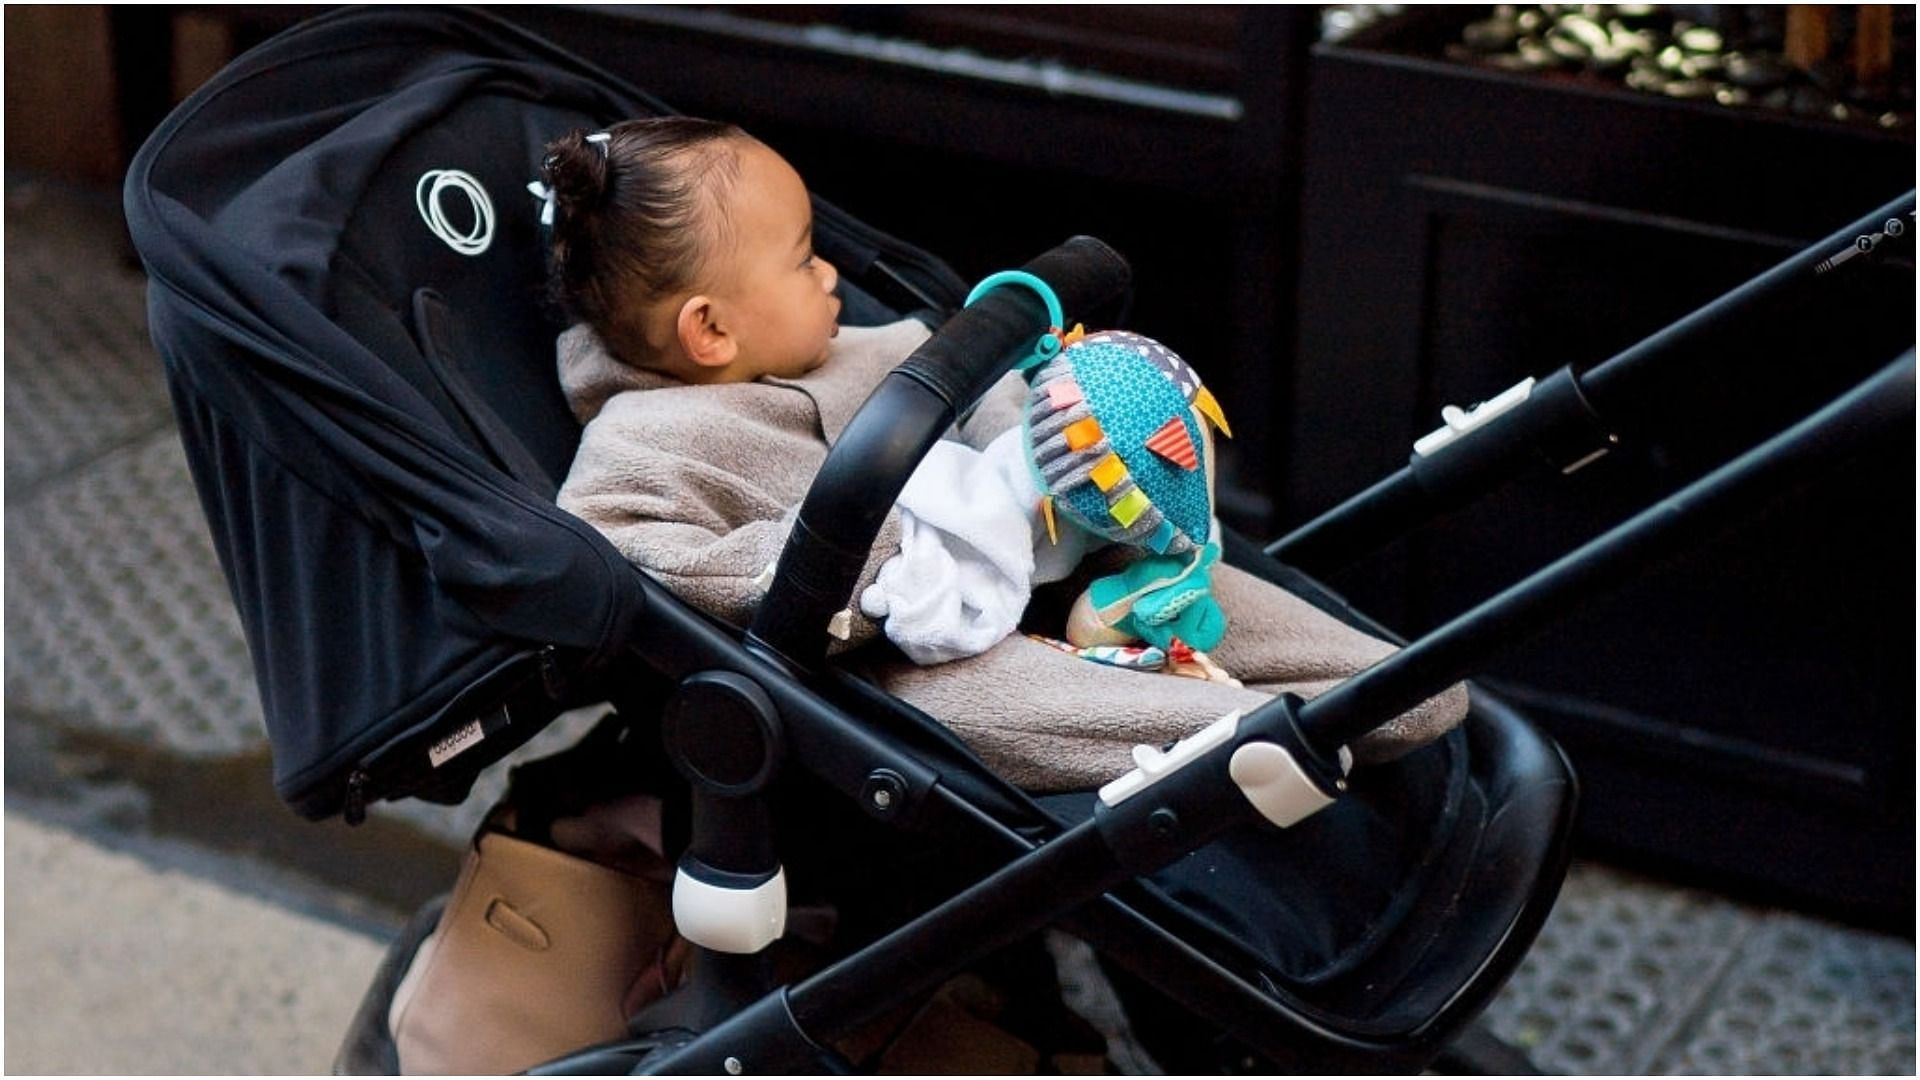 Chicago West seen in SoHo in New York City (Image via Gotham/Getty Images)